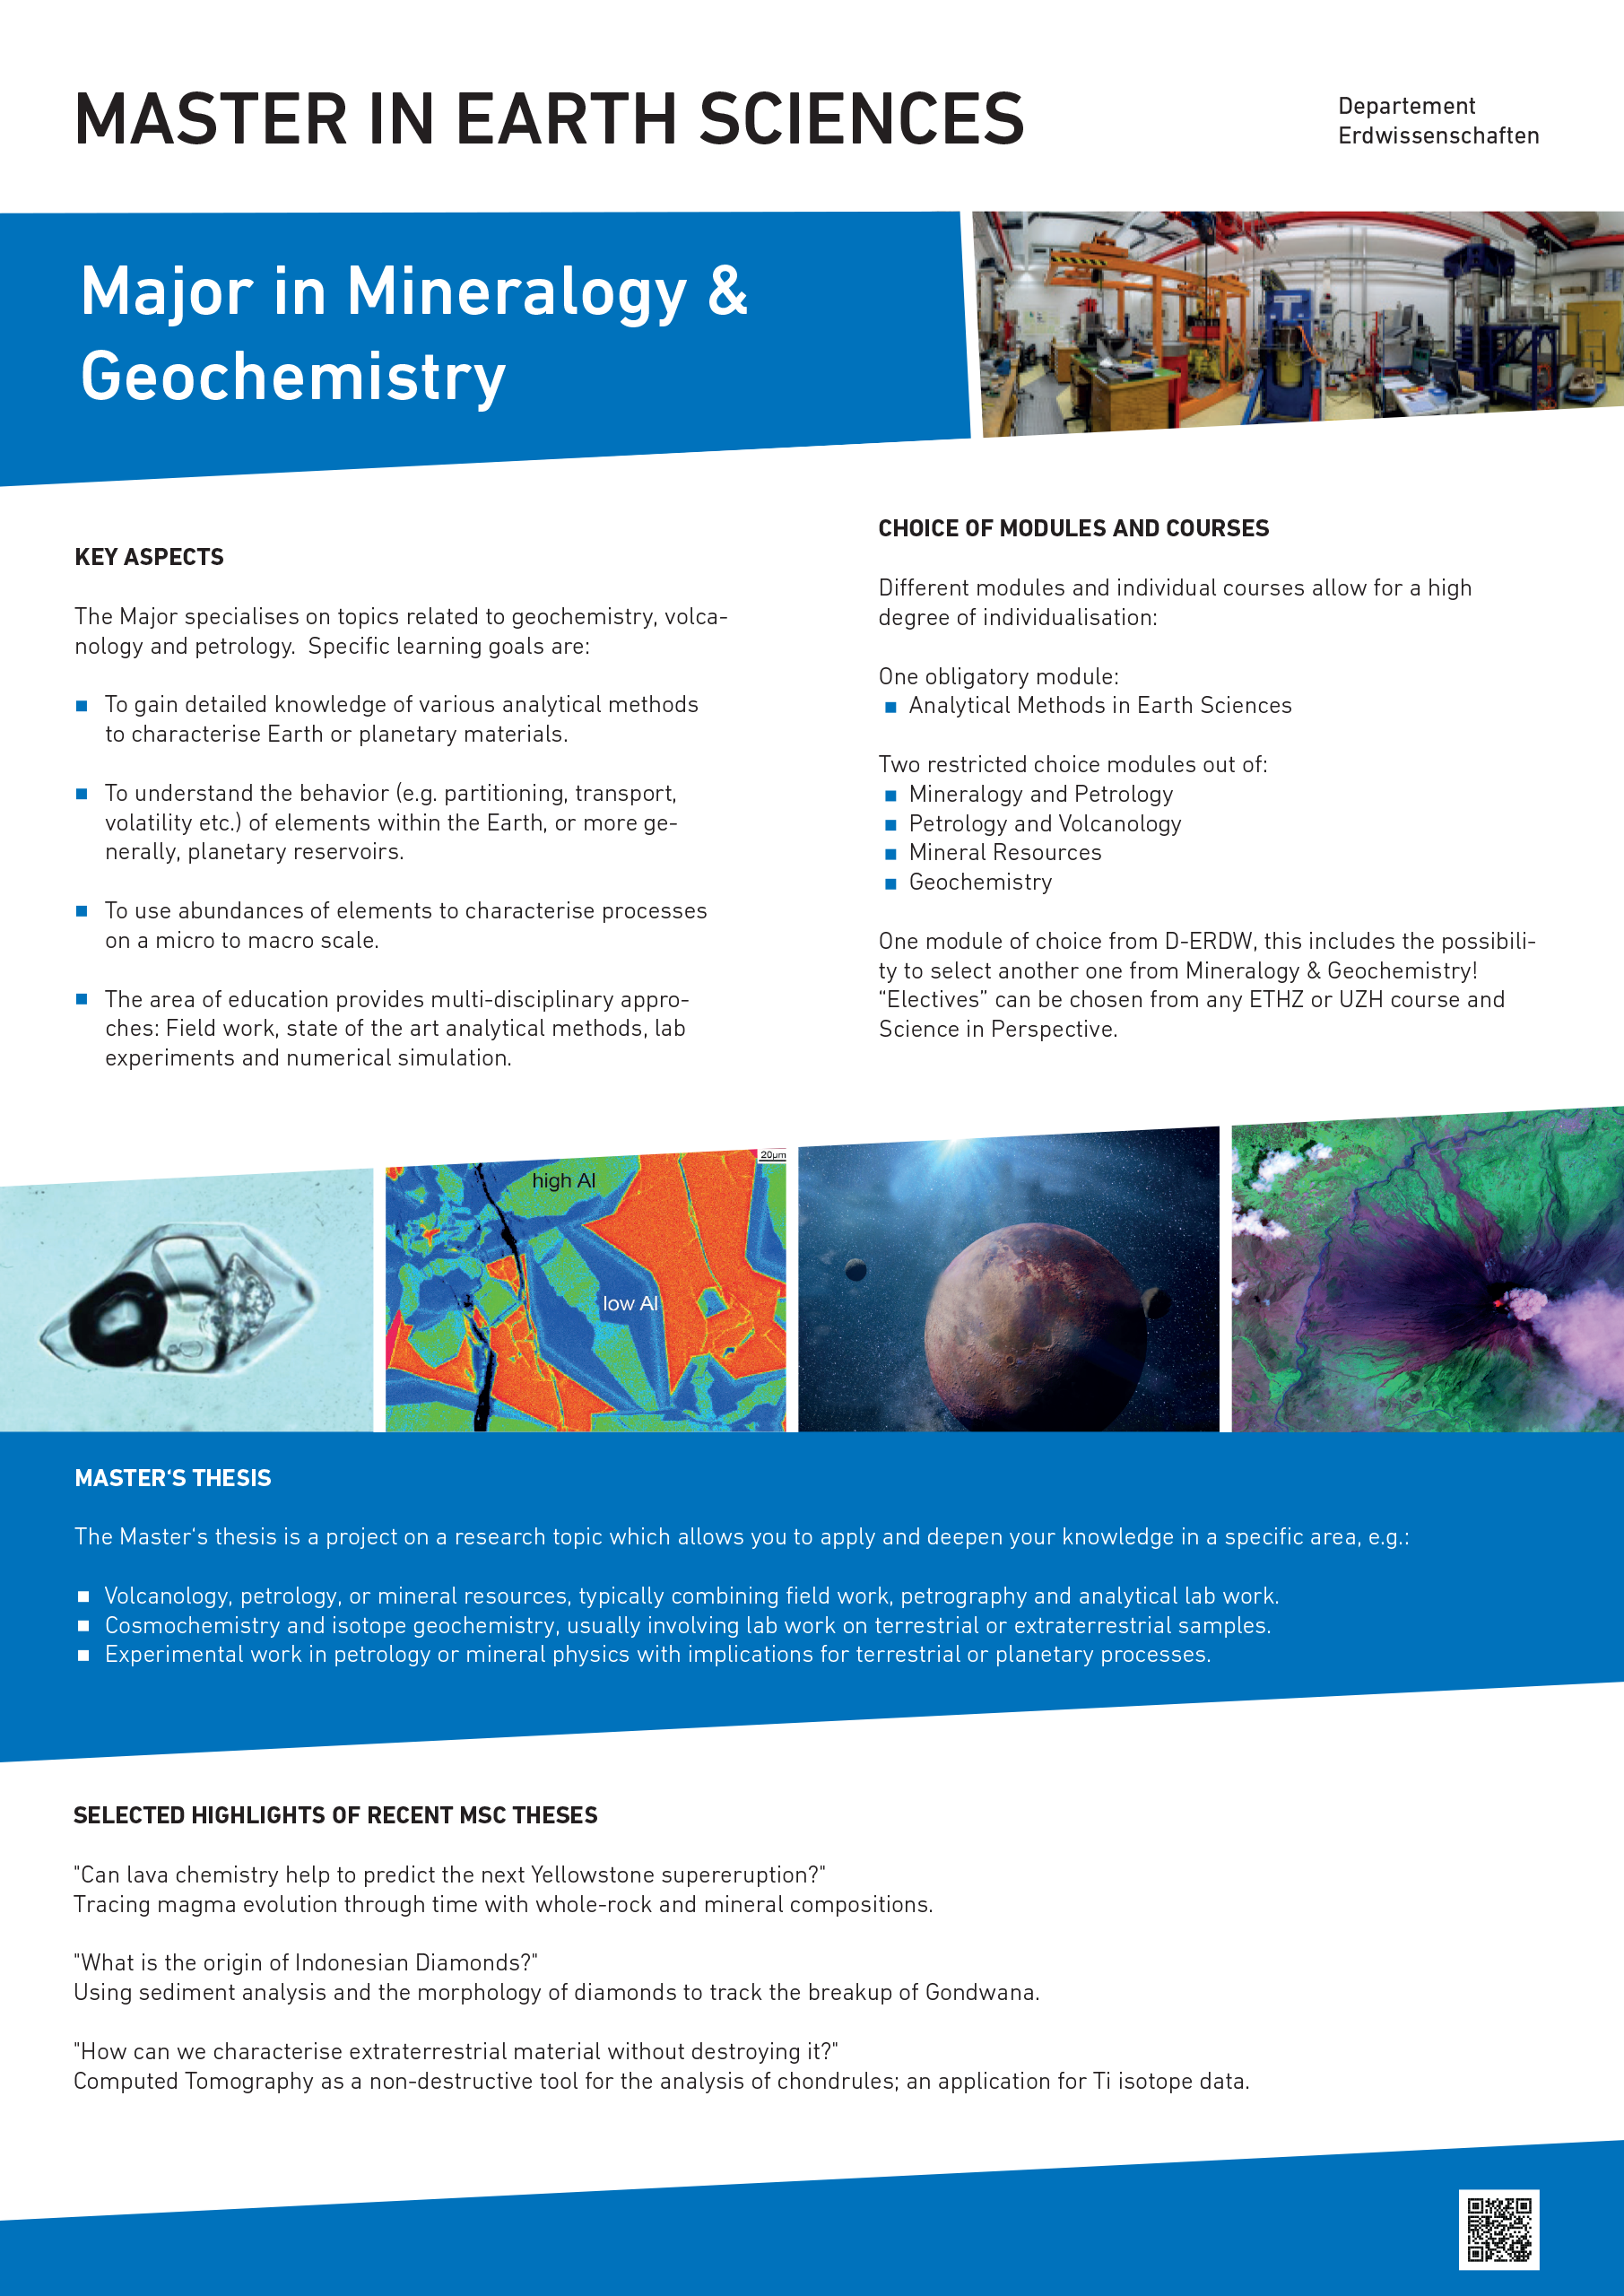 Enlarged view: Poster Major in Mineralogy and Geochemistry